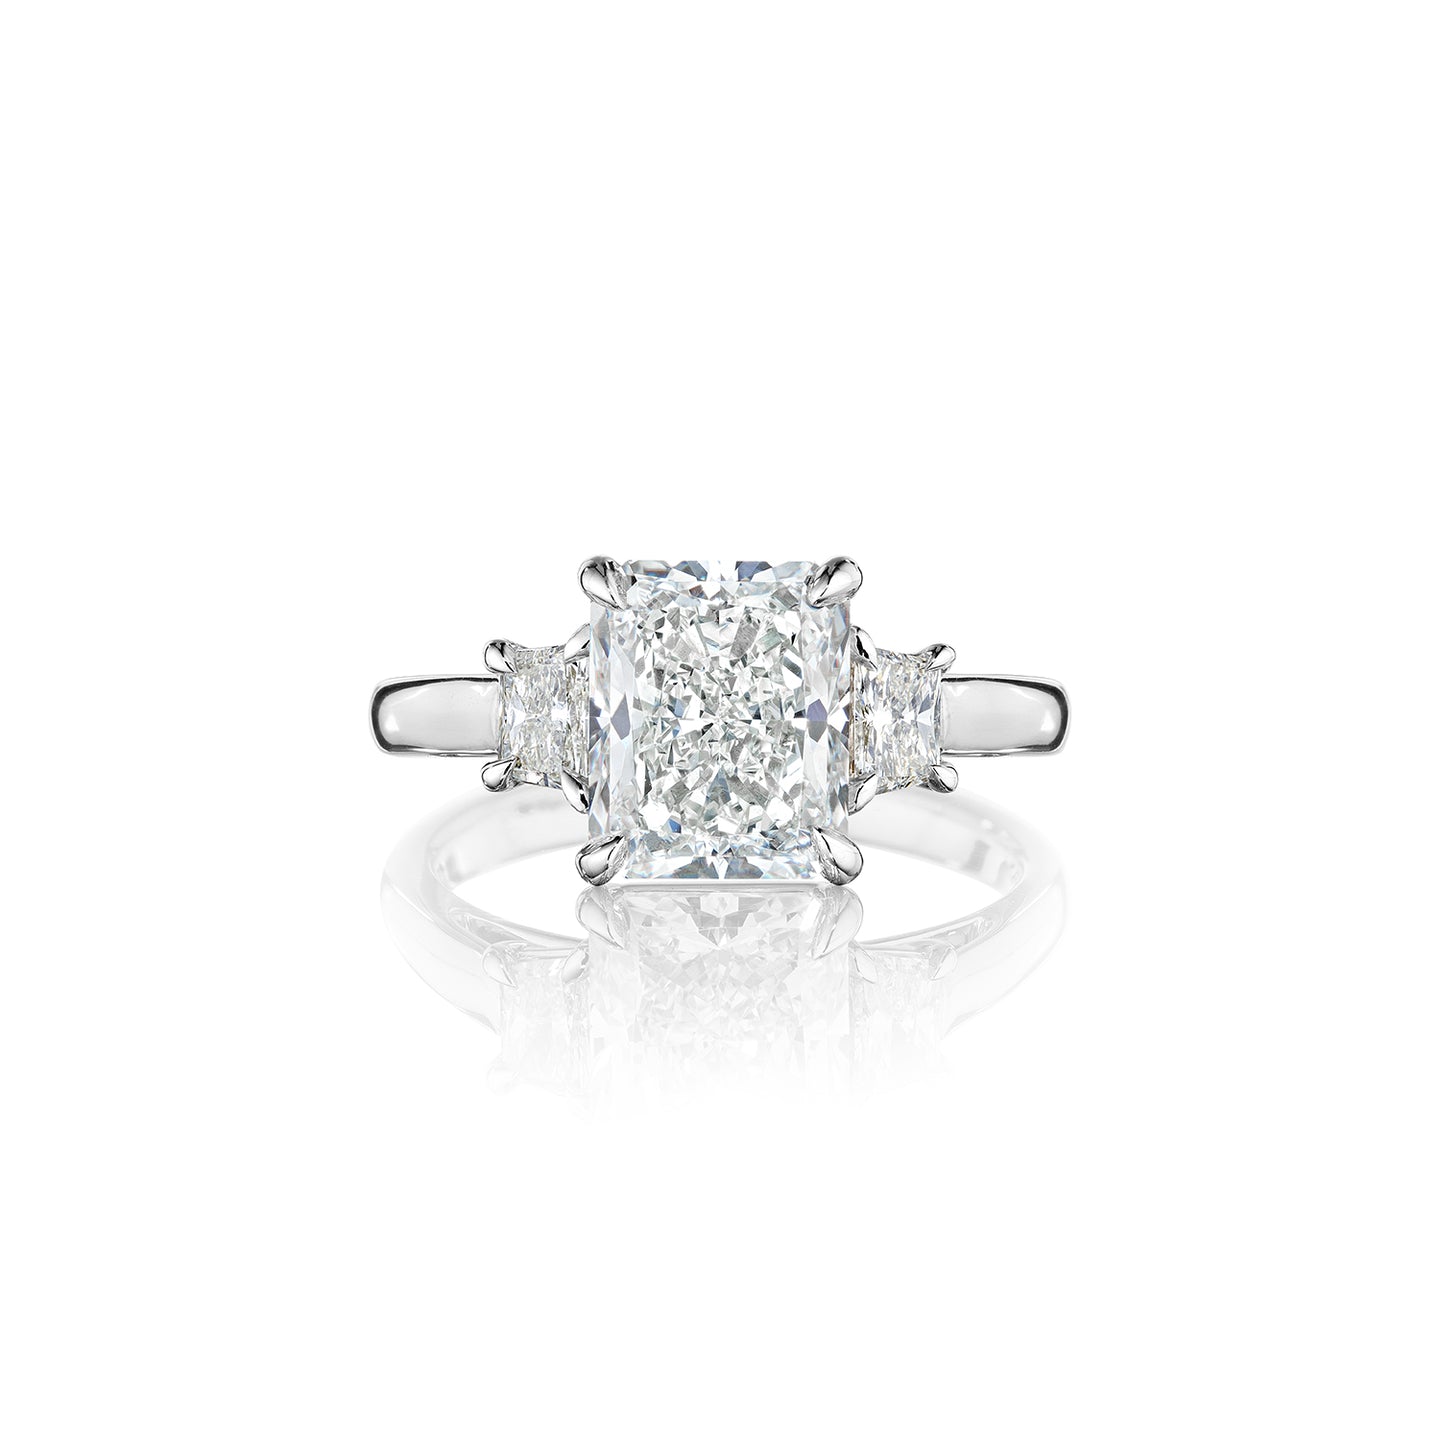 Fink's Exclusive Platinum Radiant Cut Diamond Engagement Ring with Trapezoid Side Diamonds